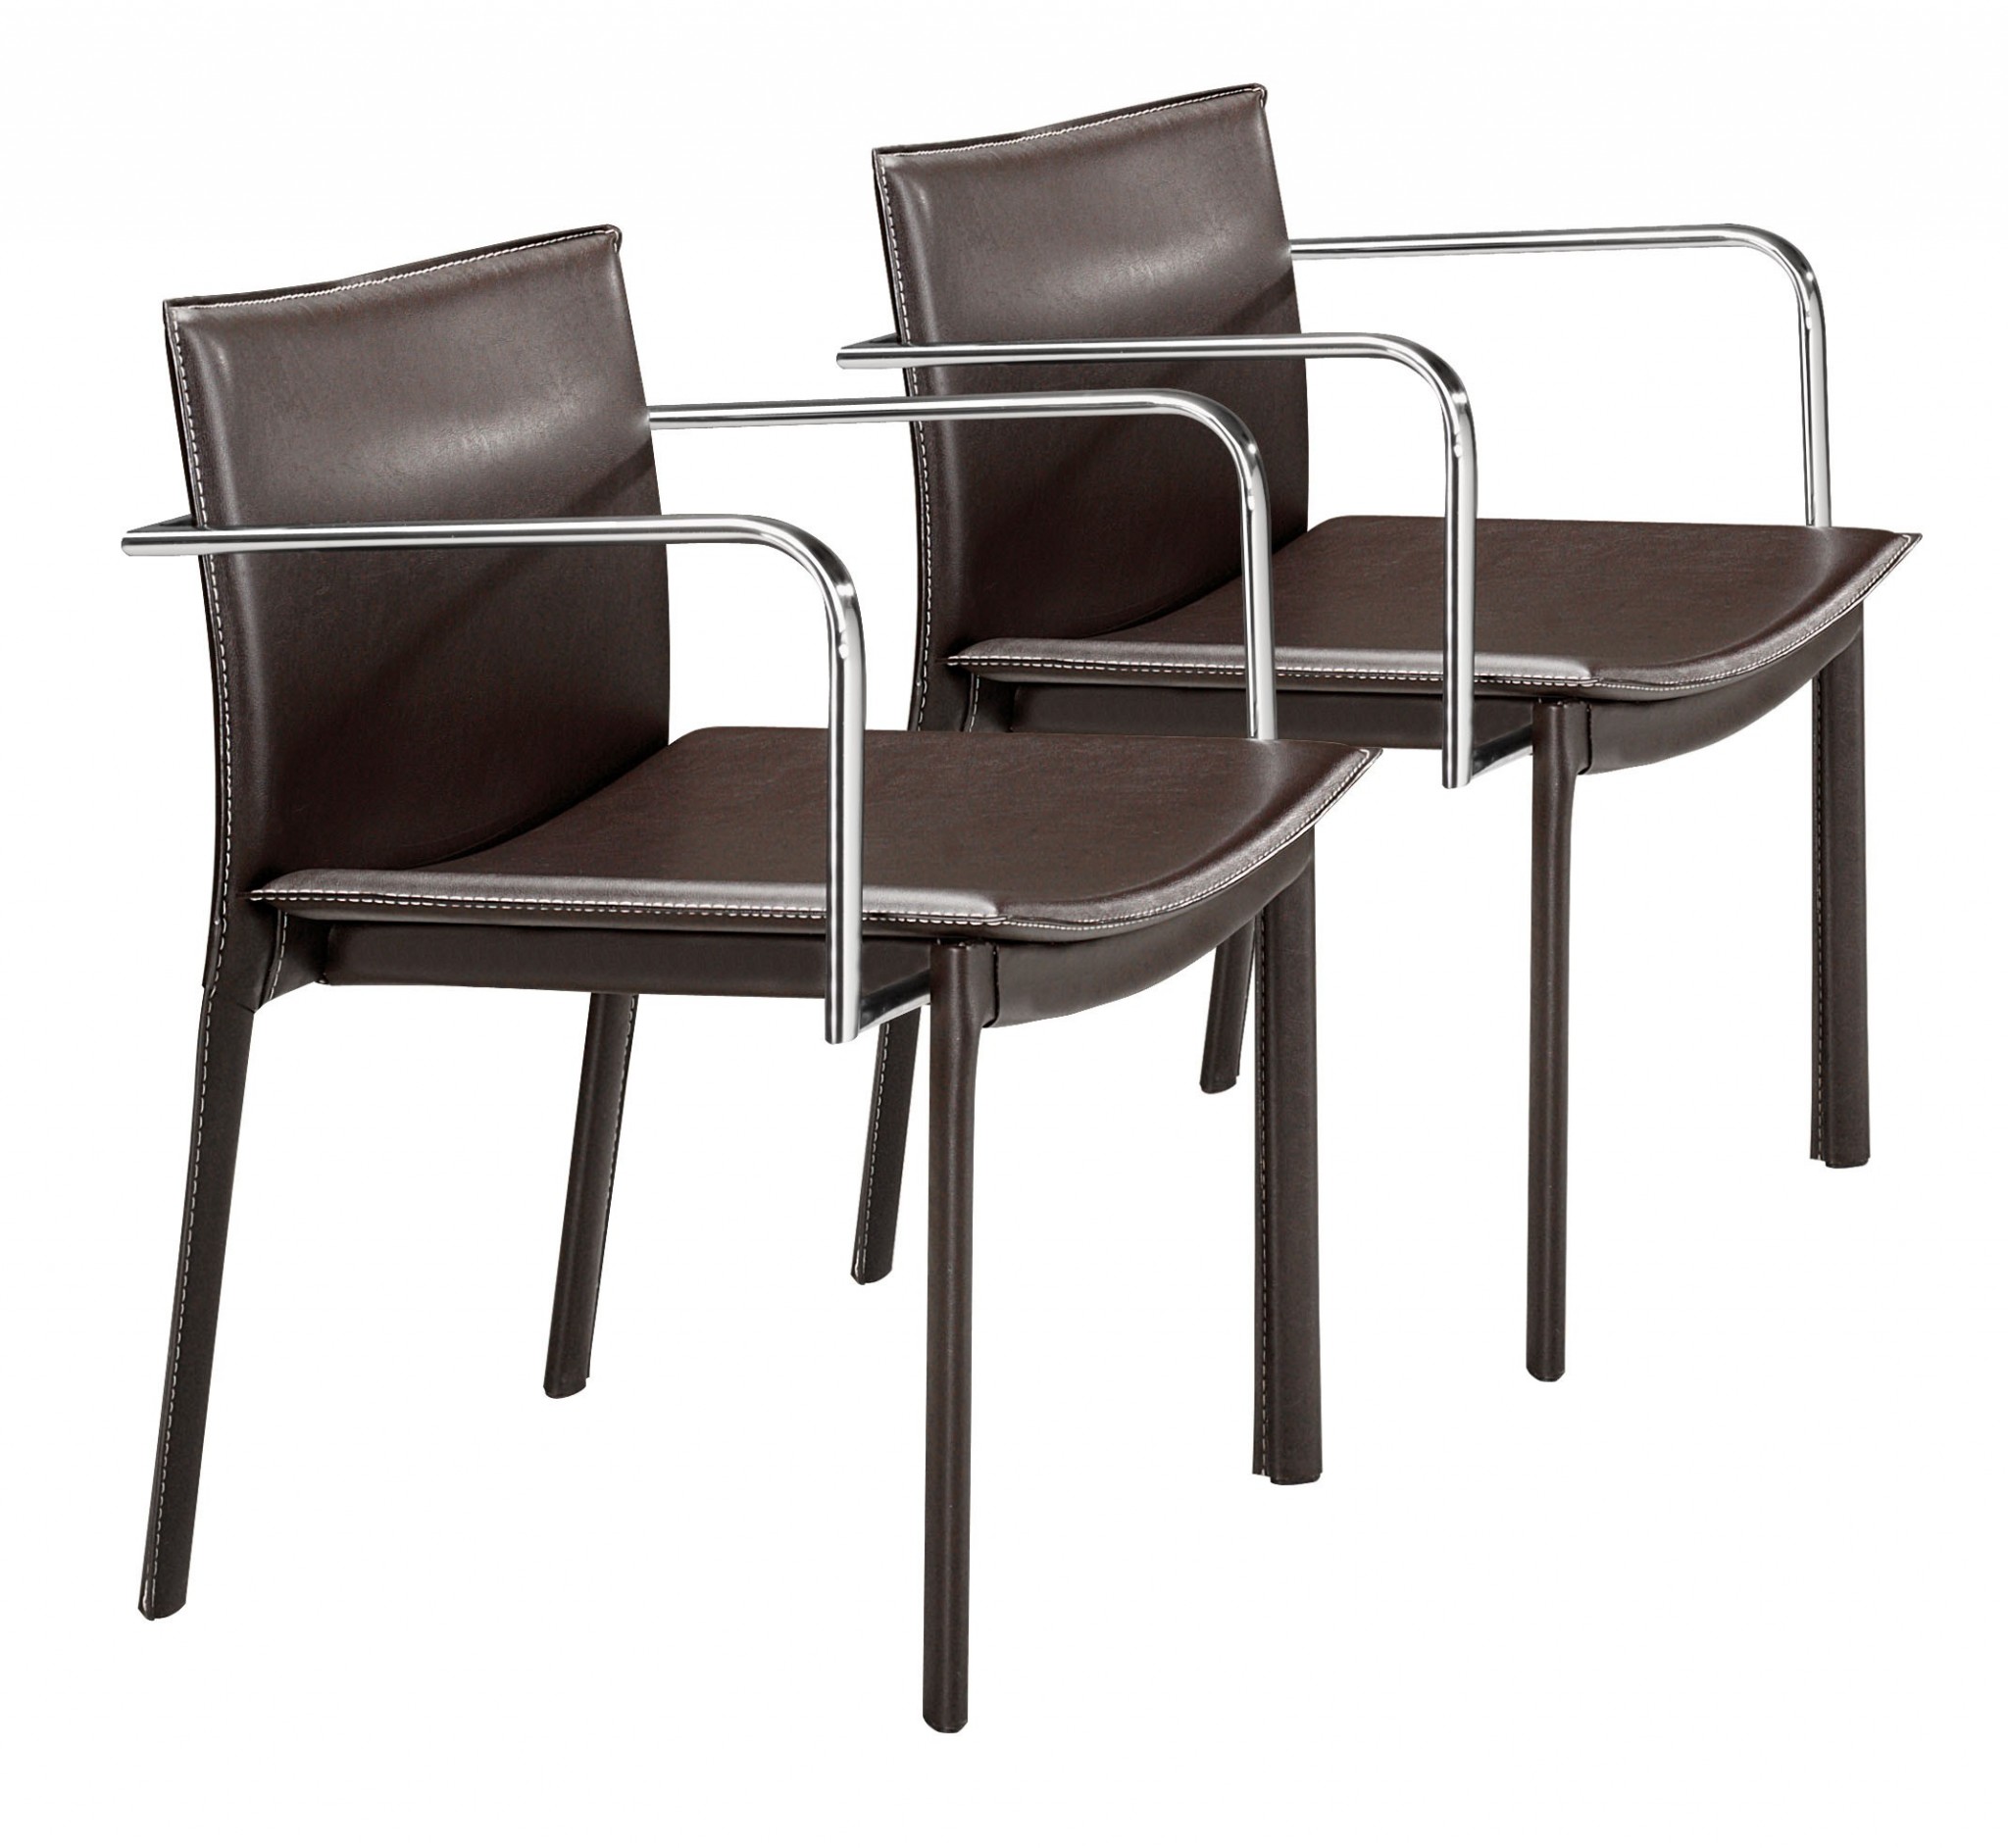 Set of Two Chrome Dark Brown Faux Leather Armchairs